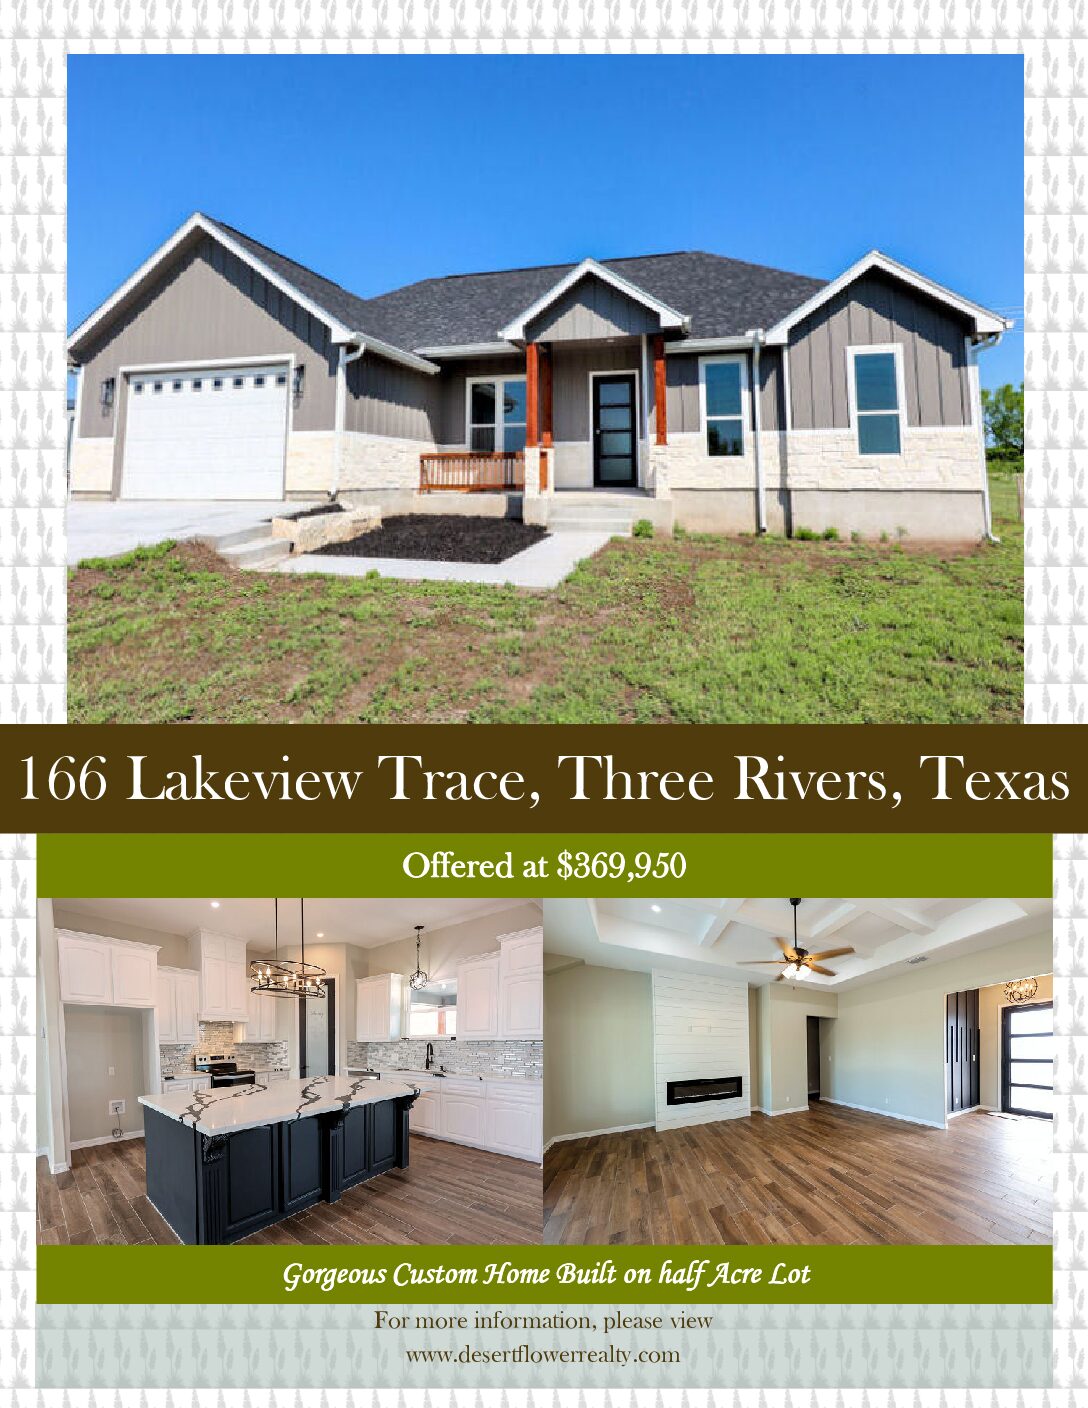 166 Lakeview Trace, Three Rivers Brochure